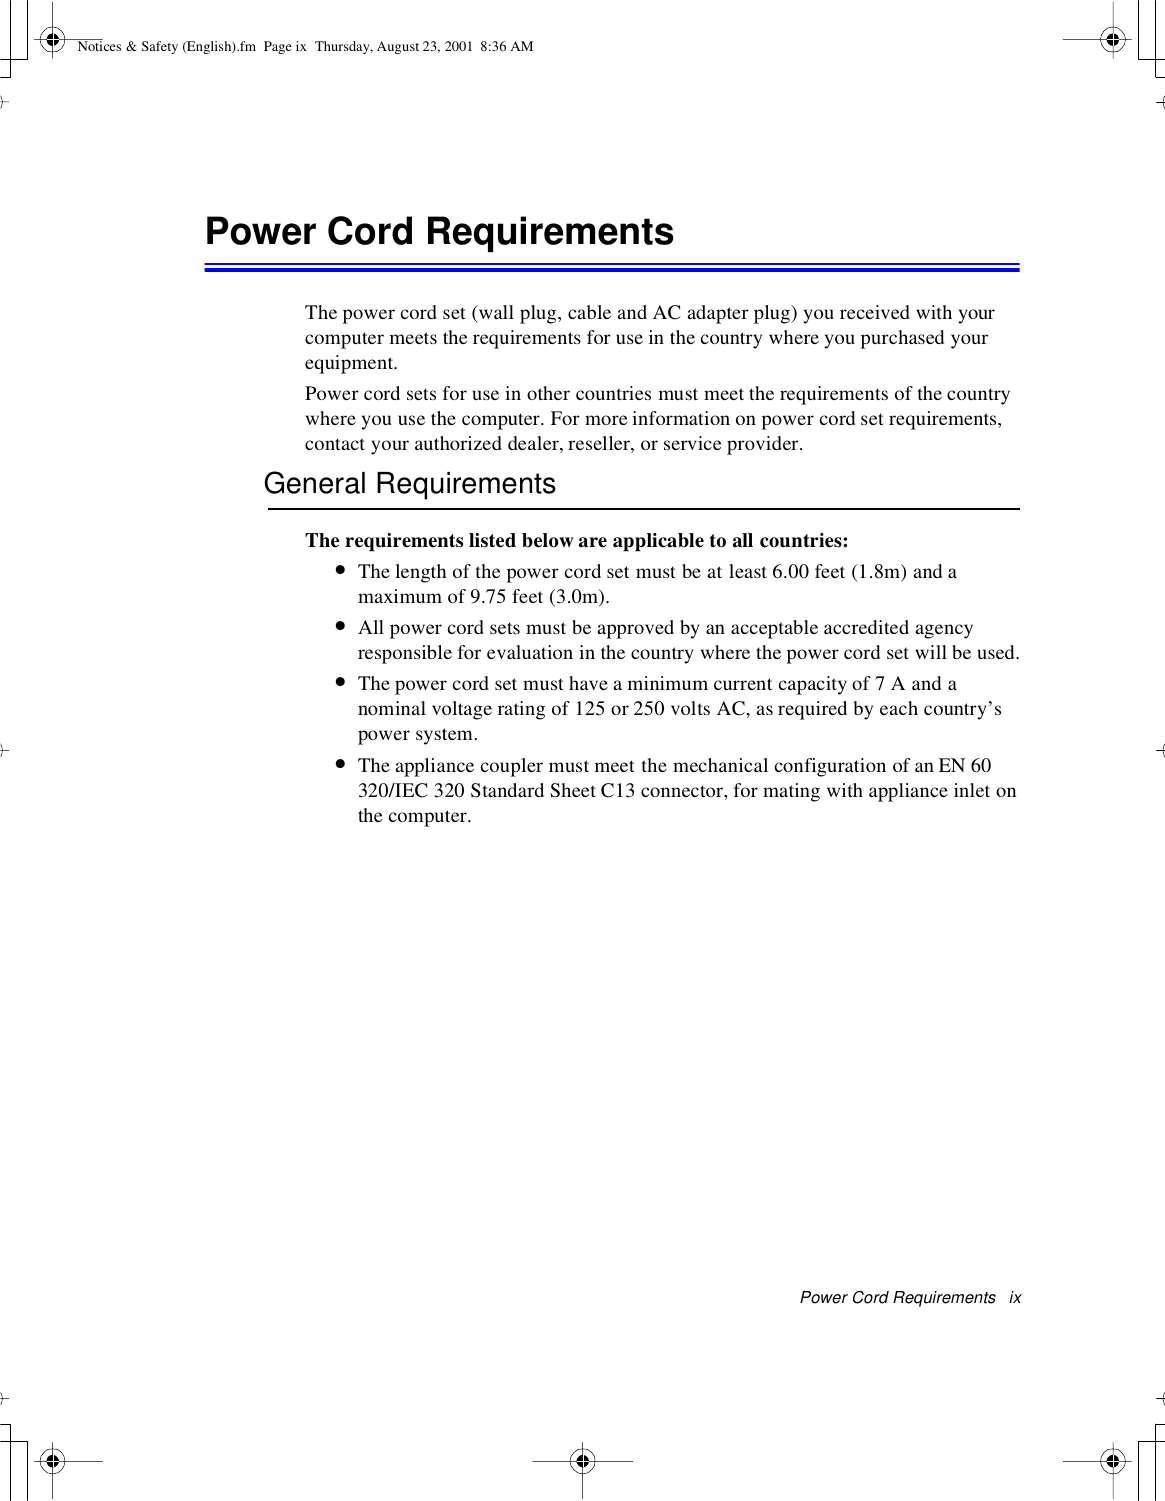 Power Cord Requirements ixPower Cord RequirementsThe power cord set (wall plug, cable and AC adapter plug) you received with yourcomputer meets the requirements for use in the country where you purchased yourequipment.Power cord sets for use in other countries must meet the requirements of the countrywhere you use the computer. For more information on power cord set requirements,contact your authorized dealer, reseller, or service provider.General RequirementsThe requirements listed below are applicable to all countries:•The length of the power cord set must be at least 6.00 feet (1.8m) and amaximum of 9.75 feet (3.0m).•All power cord sets must be approved by an acceptable accredited agencyresponsible for evaluation in the country where the power cord set will be used.•The power cord set must have a minimum current capacity of 7 A and anominal voltage rating of 125 or 250 volts AC, as required by each country’spower system.•The appliance coupler must meet the mechanical configuration of an EN 60320/IEC 320 Standard Sheet C13 connector, for mating with appliance inlet onthe computer.Notices &amp; Safety (English).fm Page ix Thursday, August 23, 2001 8:36 AM